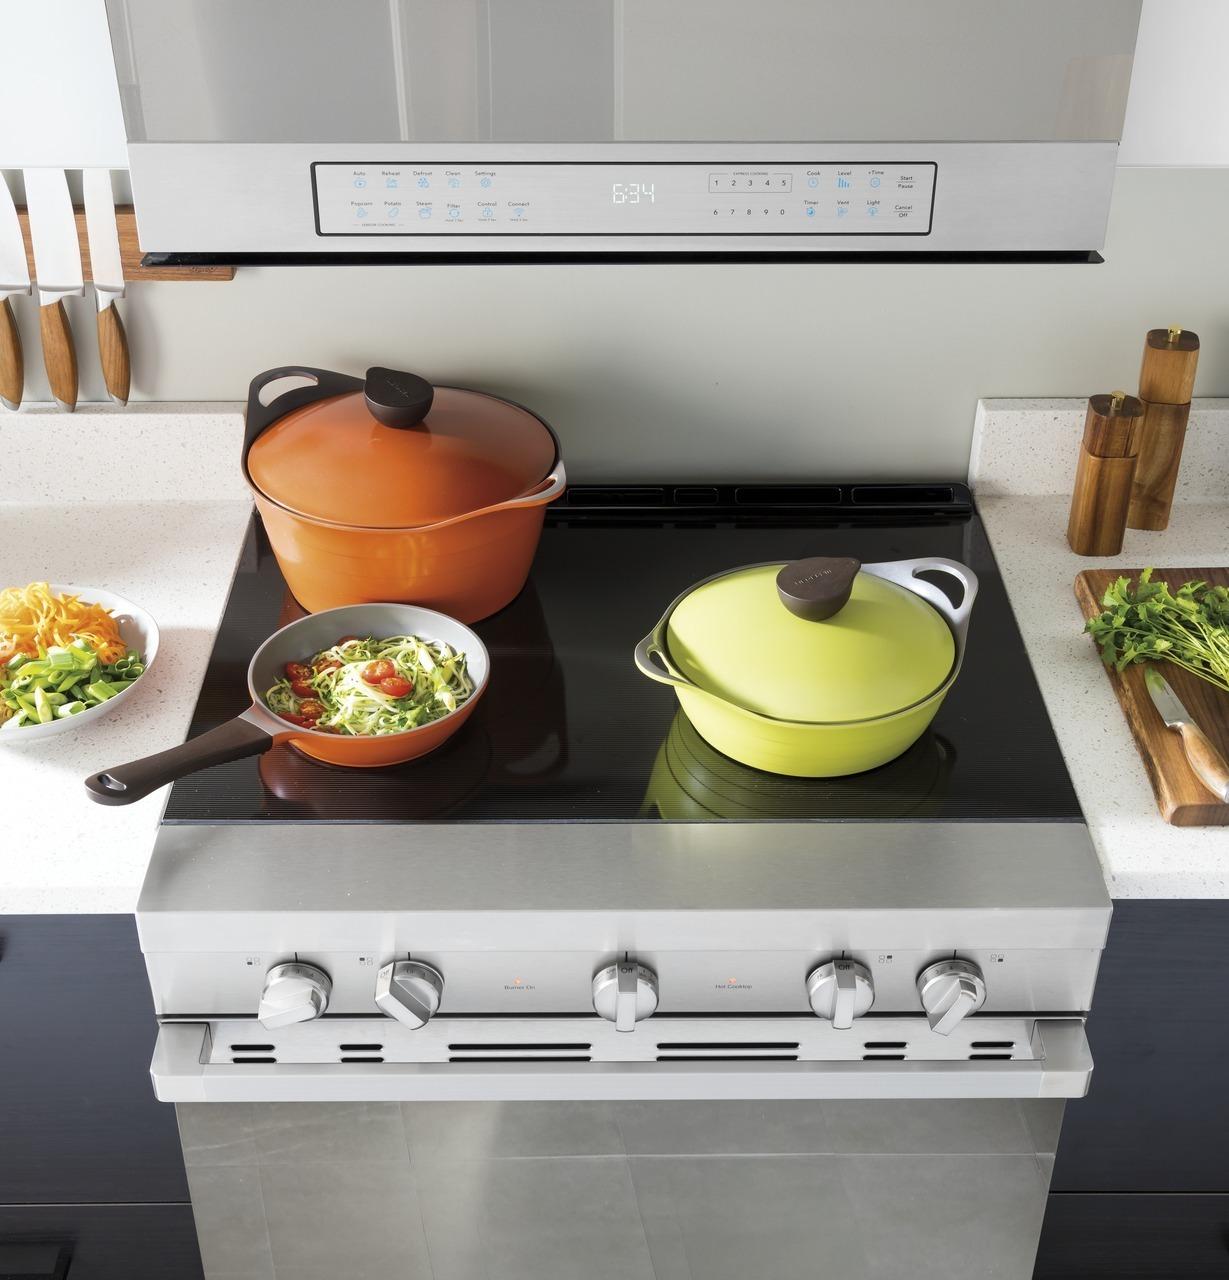 30" Smart Slide-In Electric Range with Convection